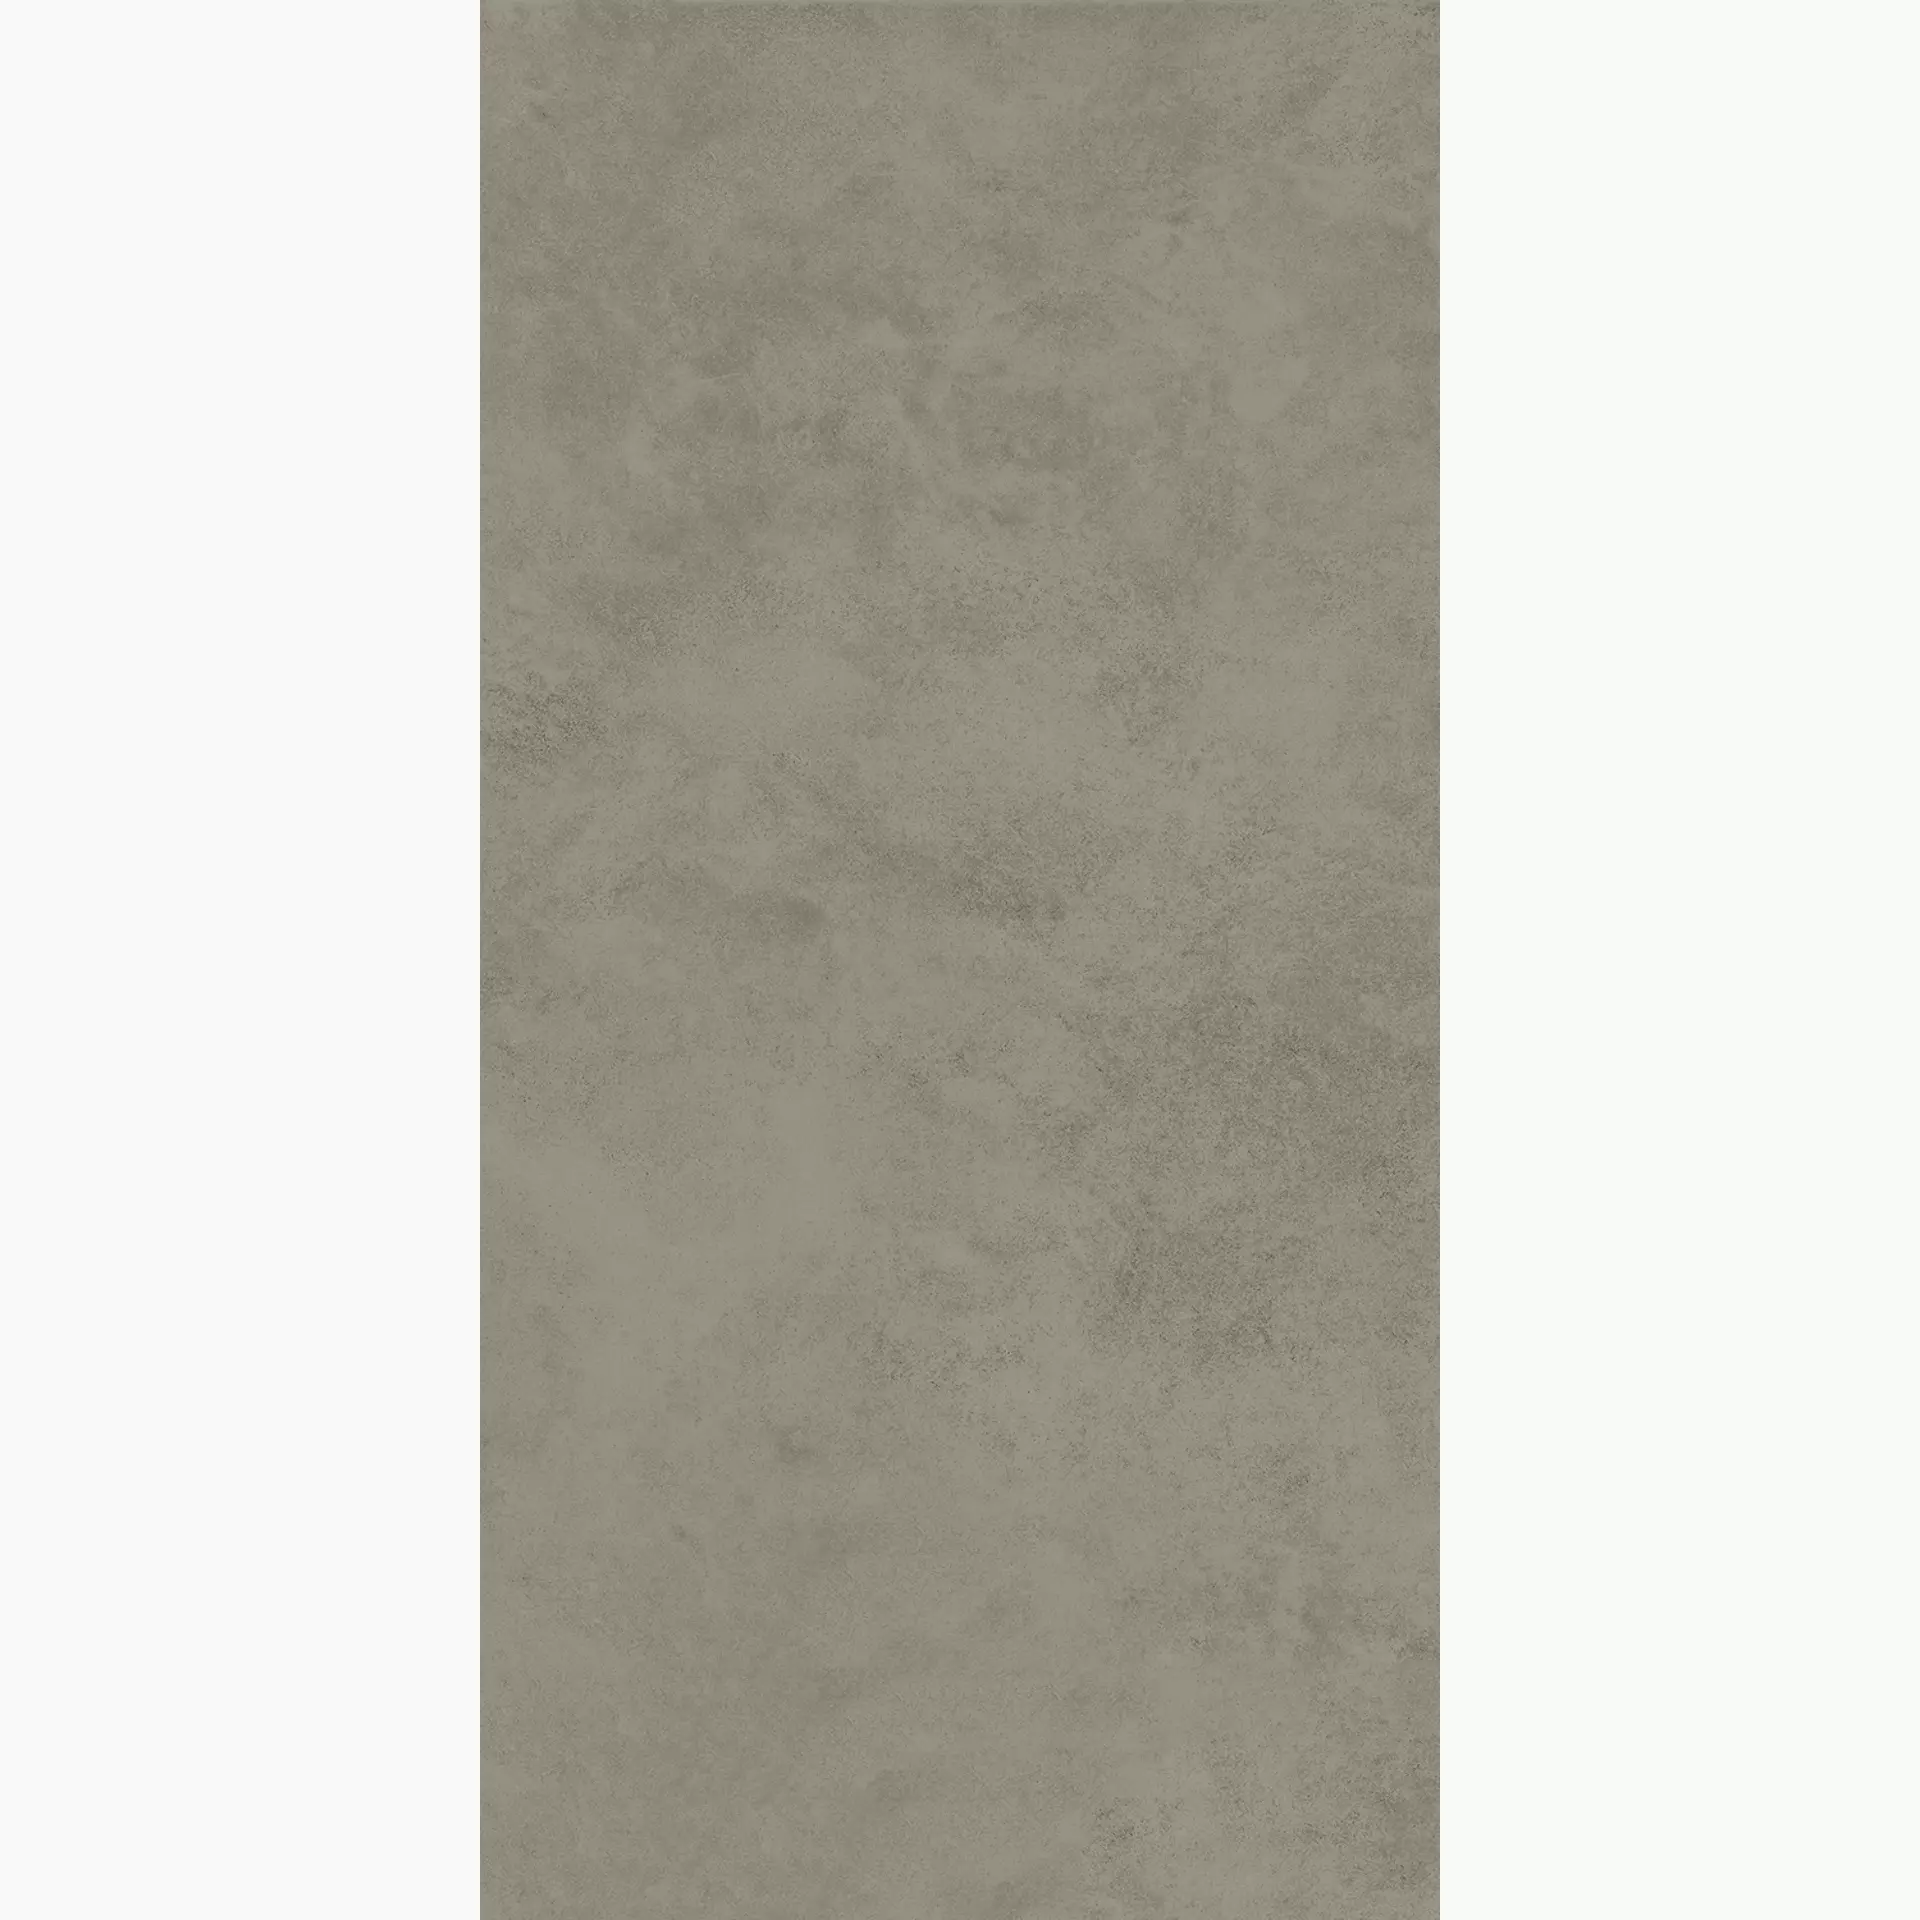 Margres Time 2.0 Grey Natural B2562T27B 60x120cm rectified 11mm